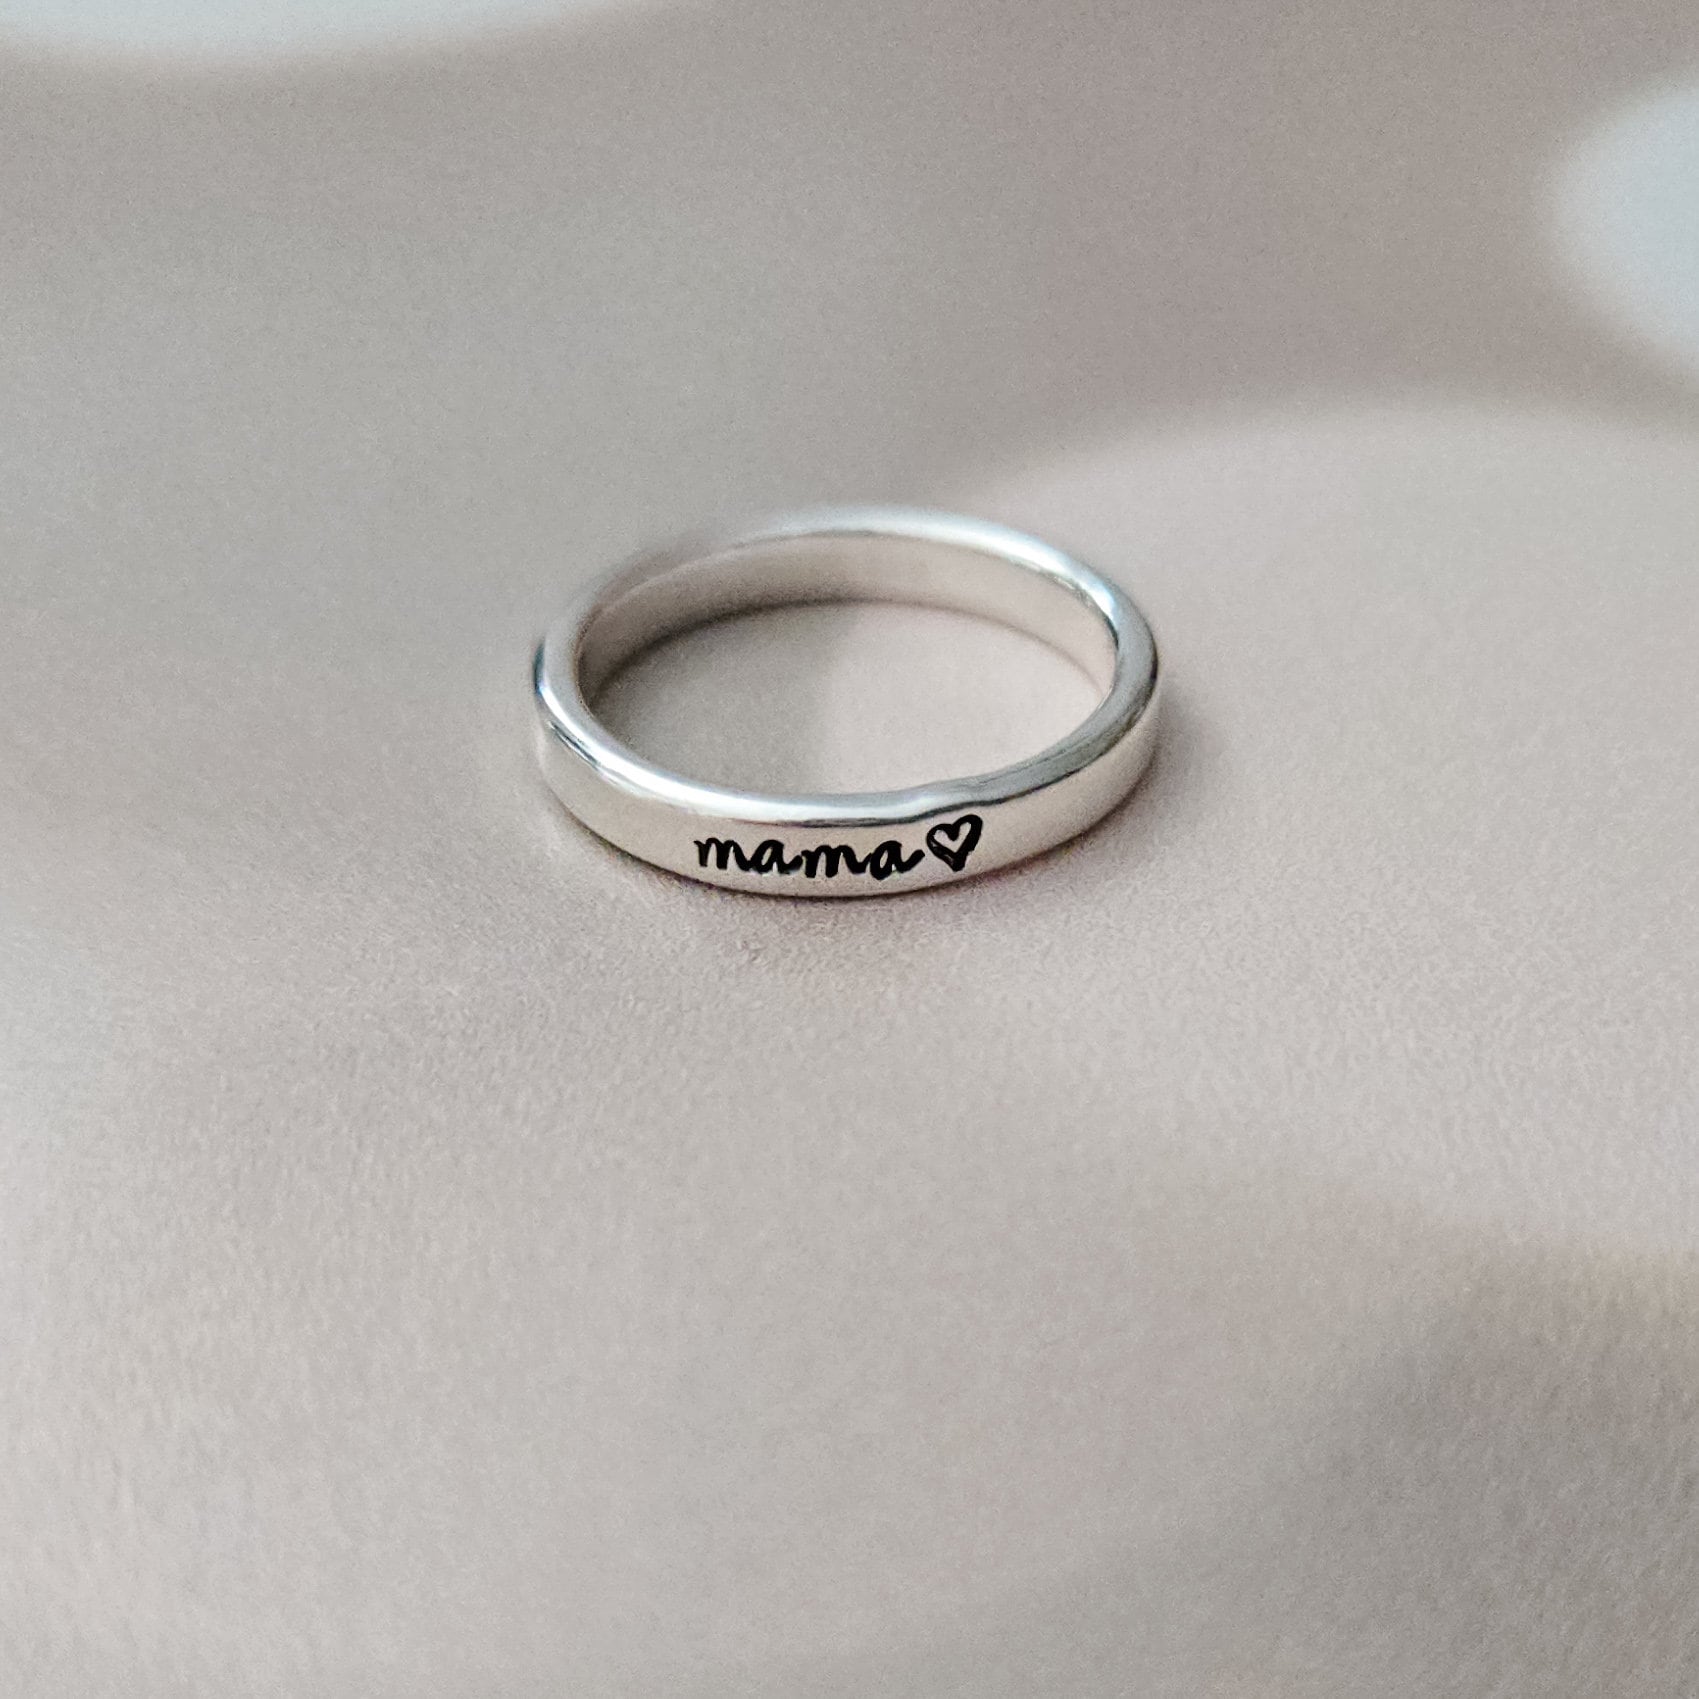 Mama Silver Stacking Ring - Personalized Silver Name Ring For Mom Salt and Sparkle